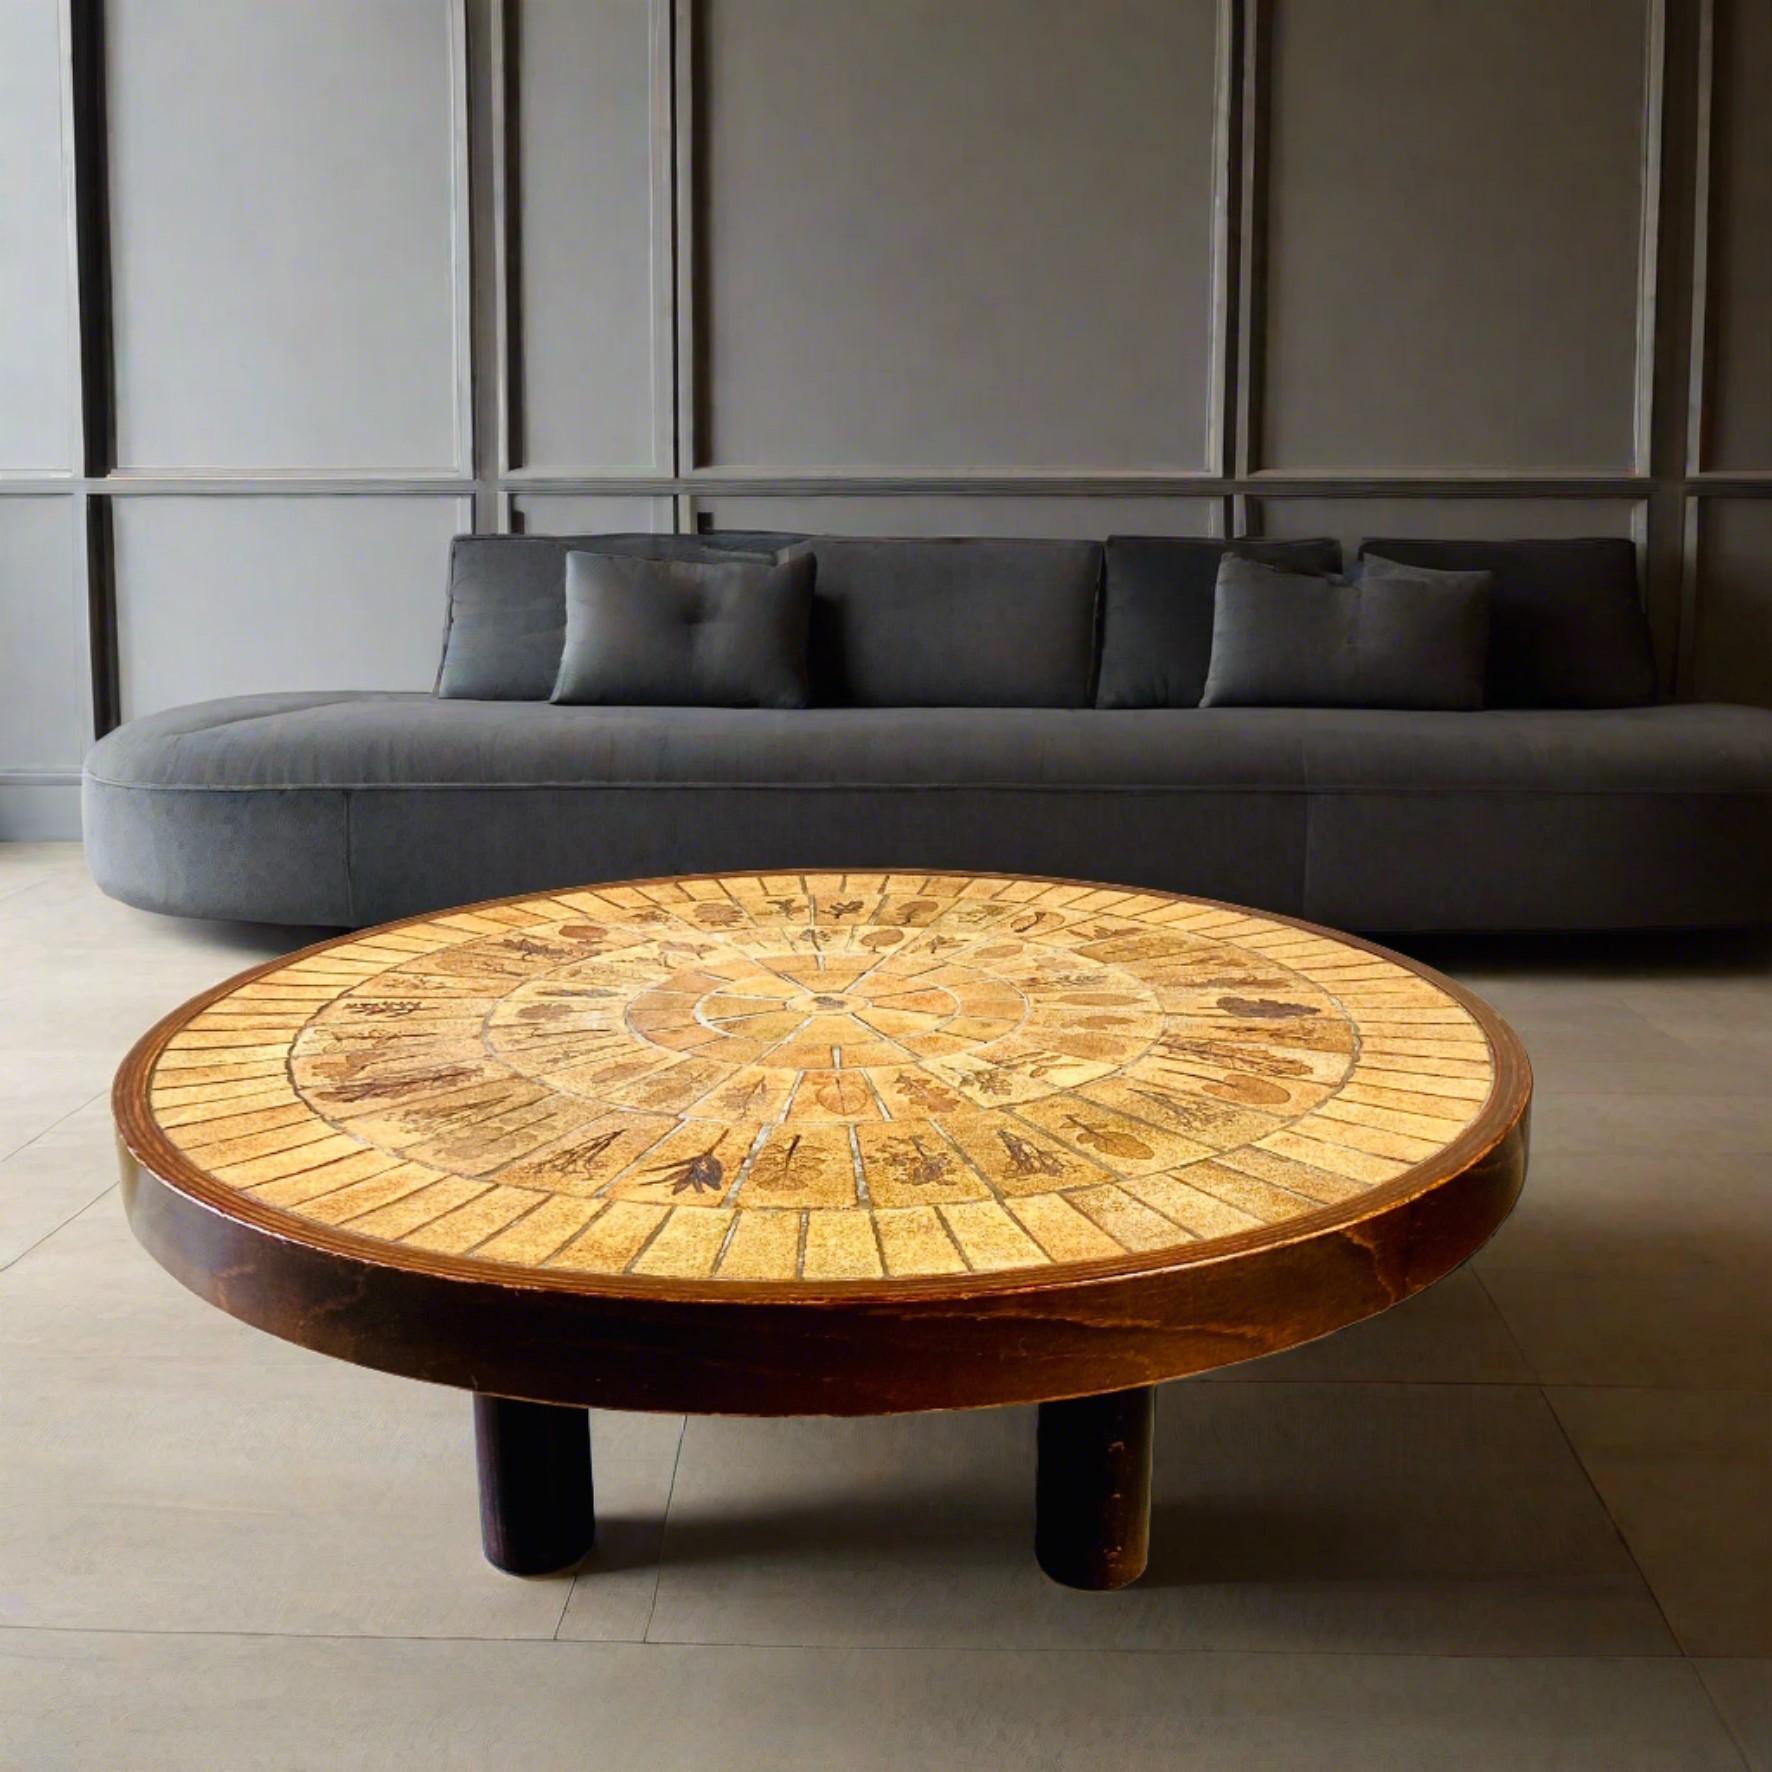 Round Brutalist Ceramic Coffee Table by Roger Capron, France 1960 For Sale 1